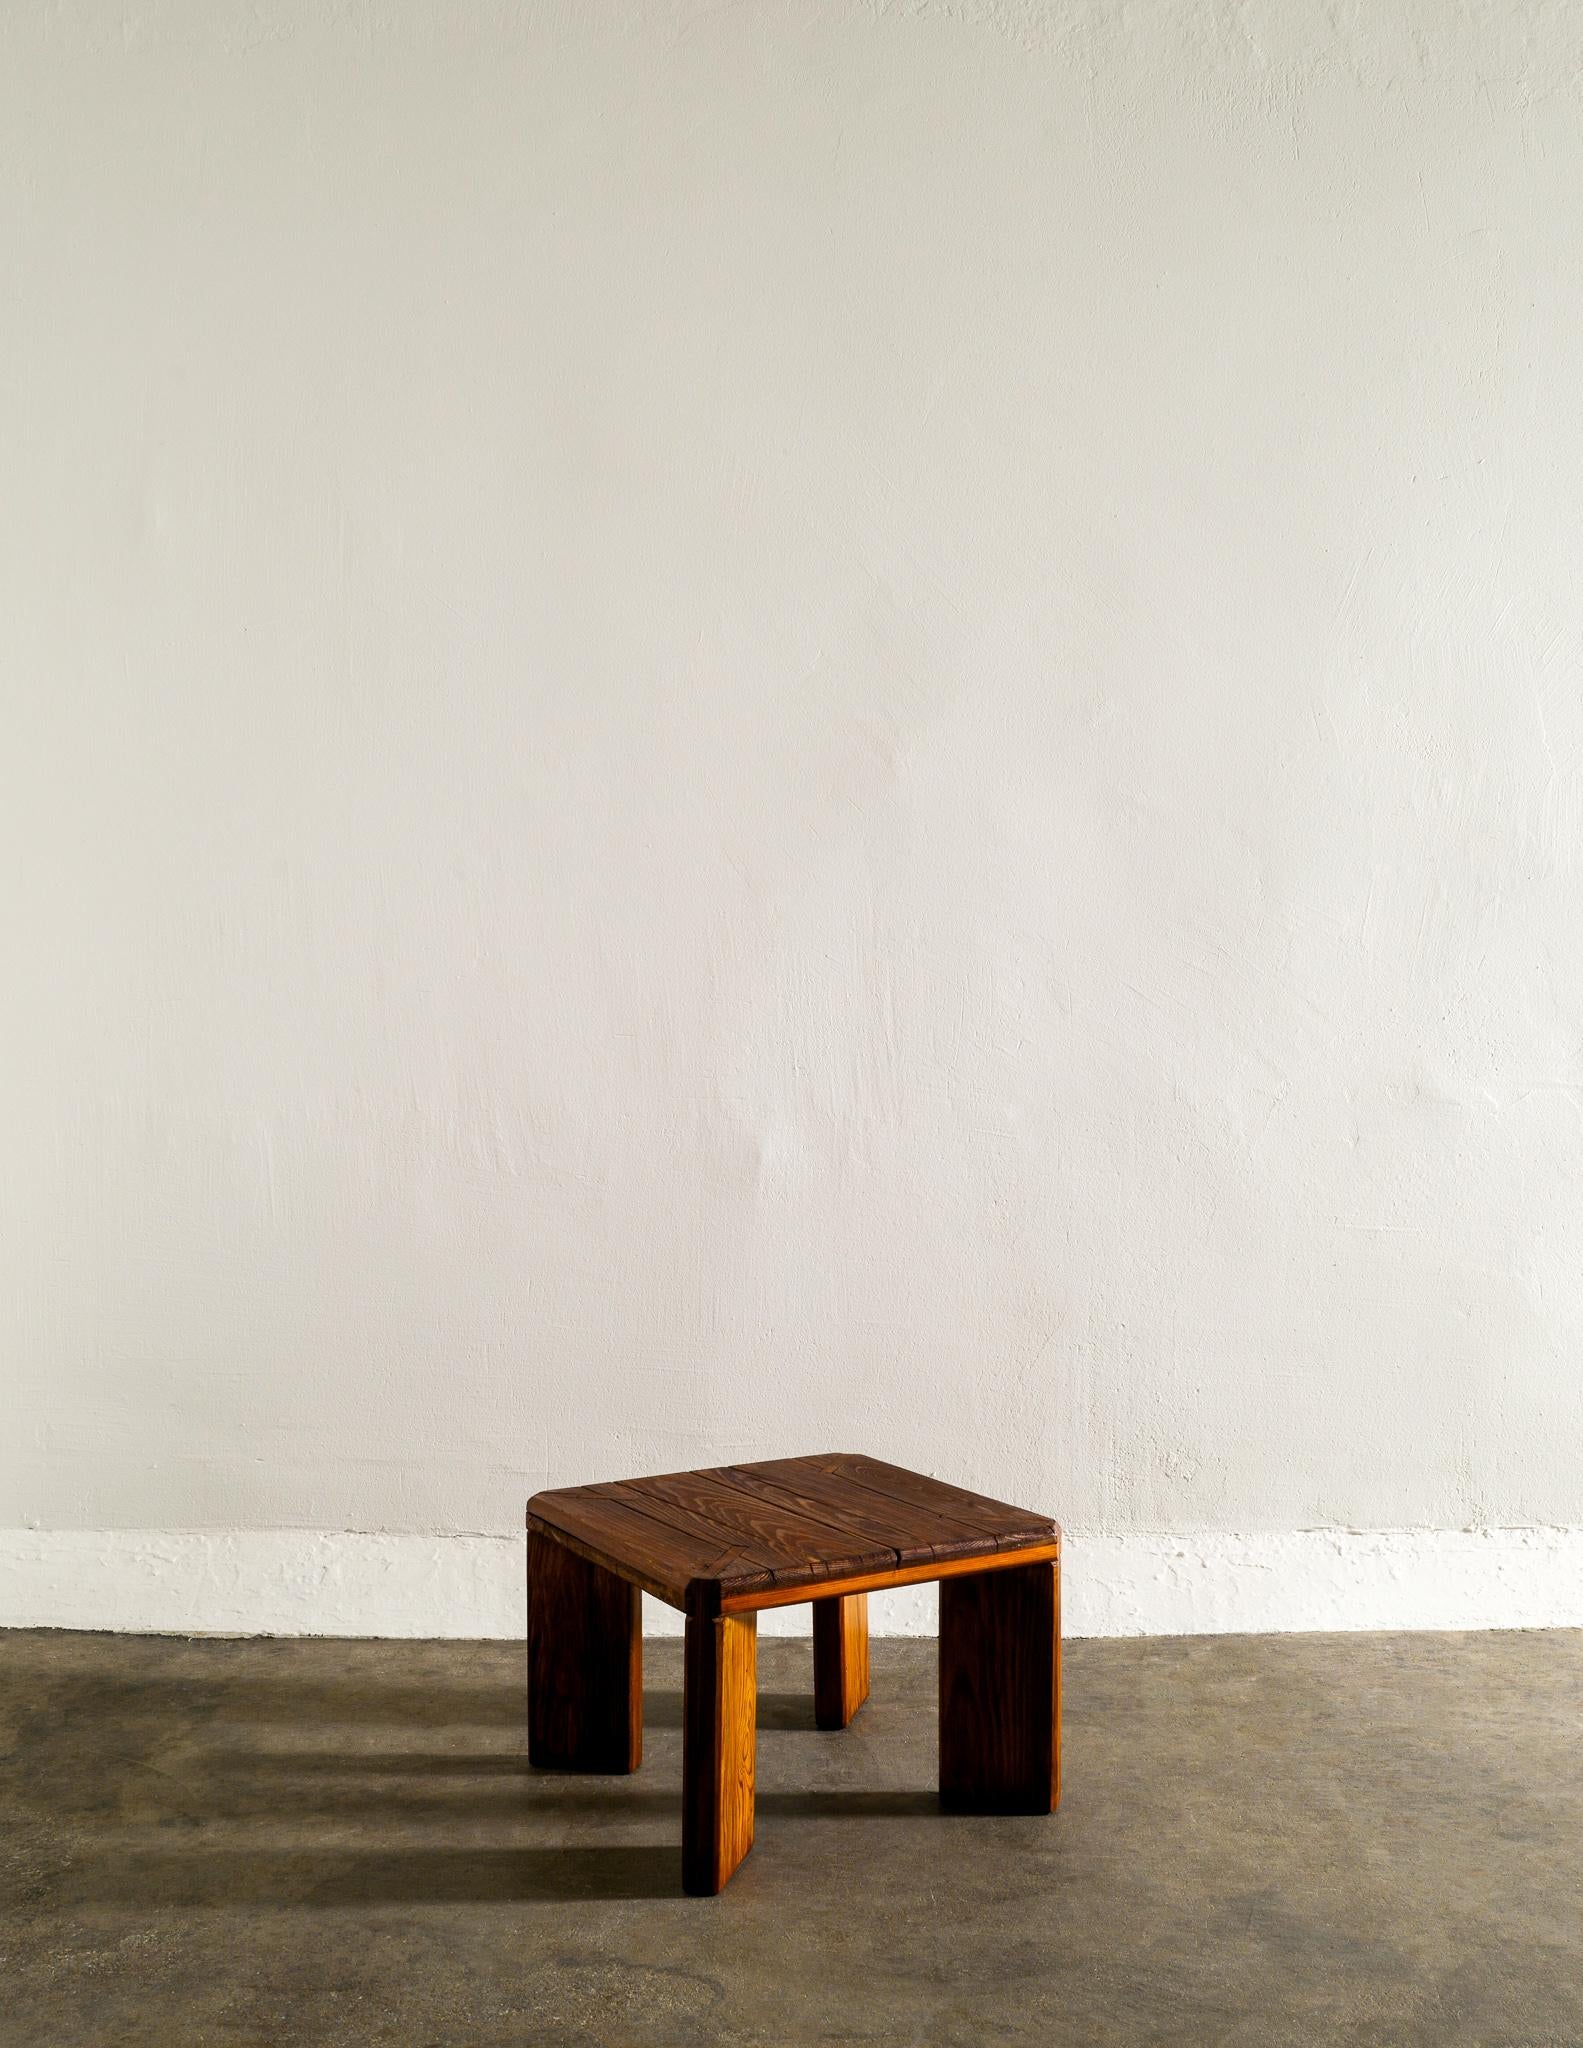 Scandinavian Modern Midcentury Pine Stool Side Table by Roland Wilhelmsson Produced in Sweden 1960s